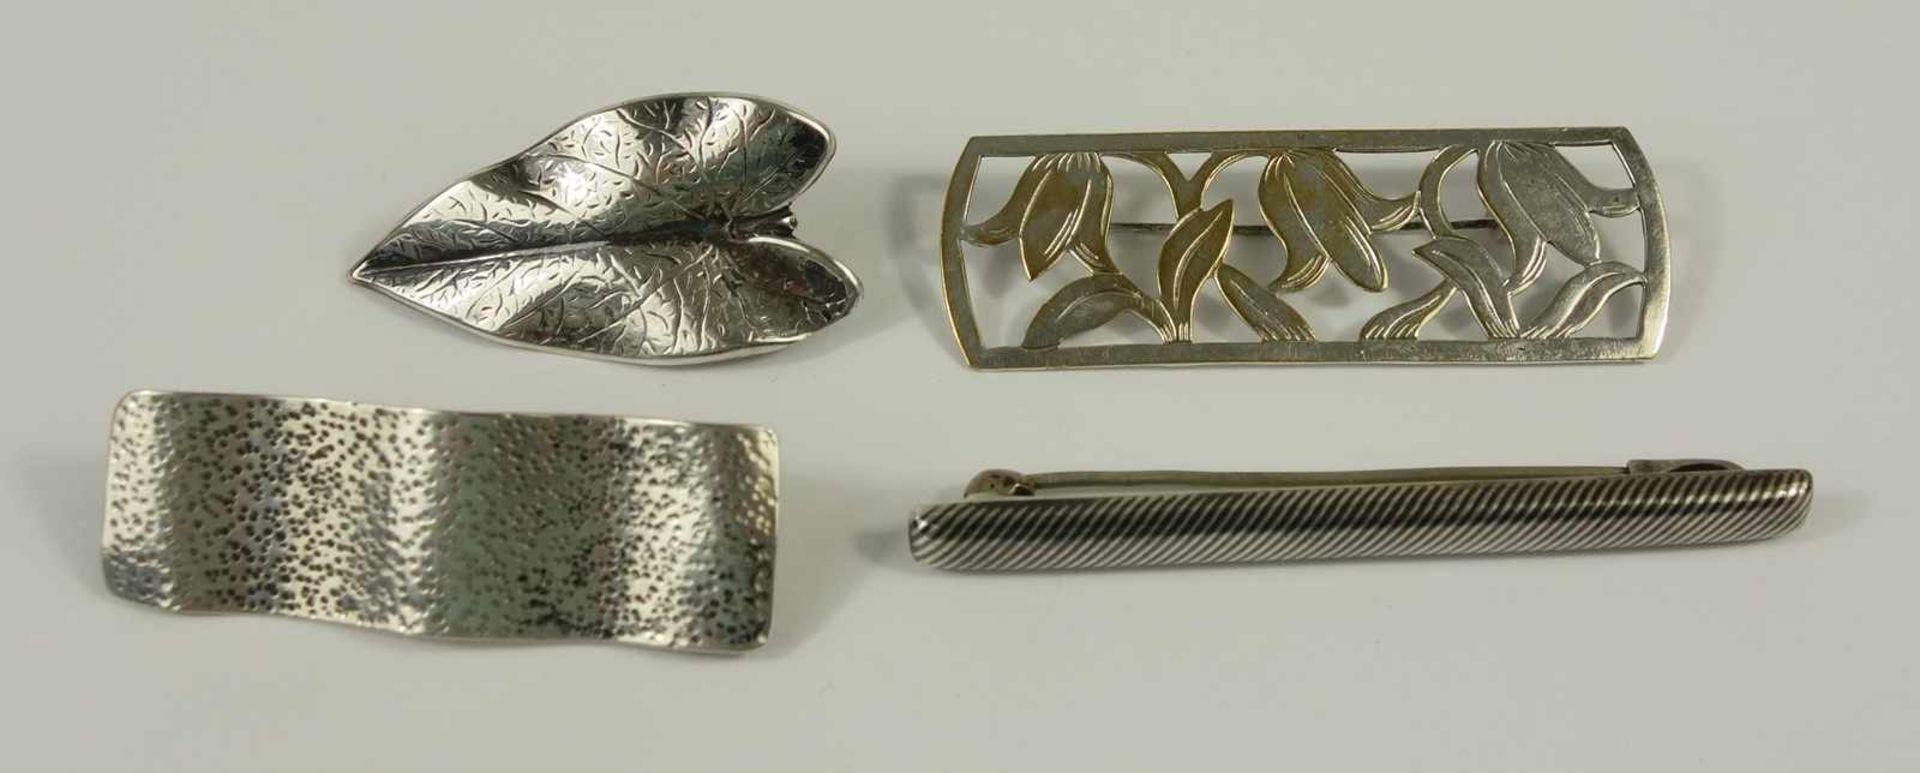 3 brooches and a dress clip, silver, weight 15,19g, different shapes, l. from 4cm to 6,3cm